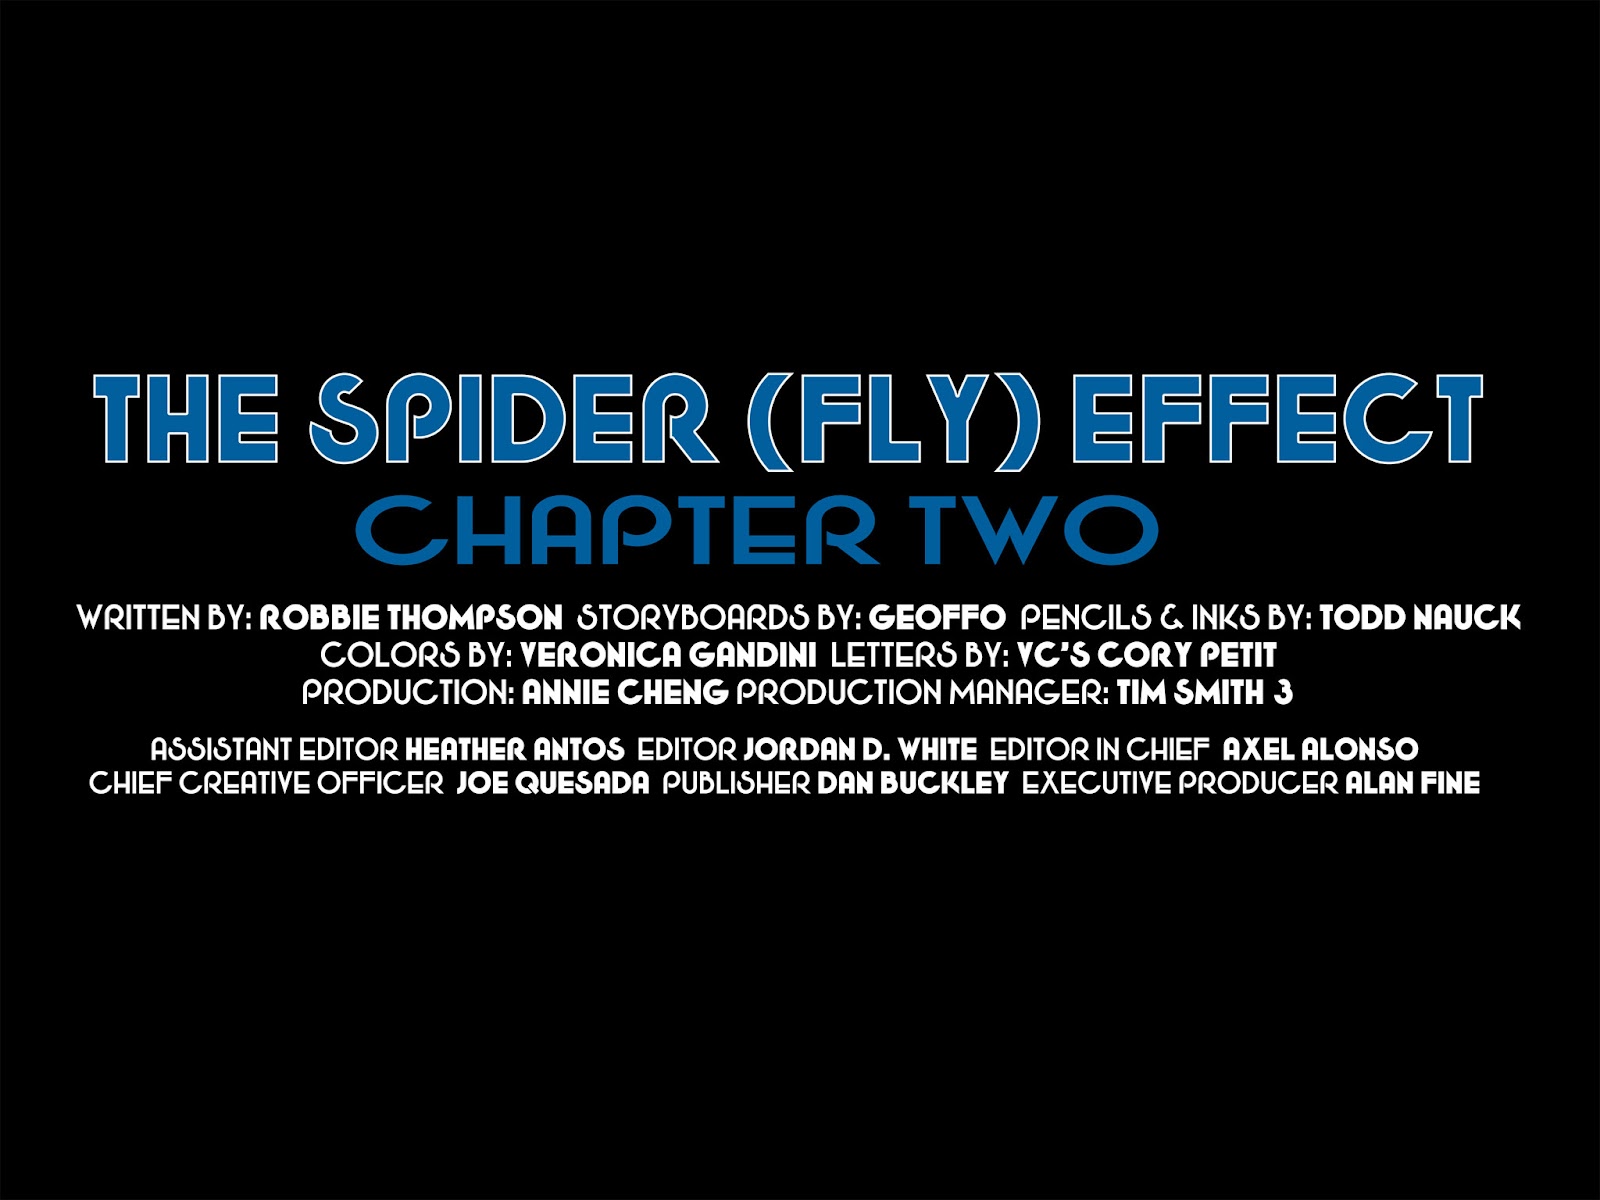 The Amazing Spider-Man & Silk: The Spider(fly) Effect (Infinite Comics) issue 2 - Page 8